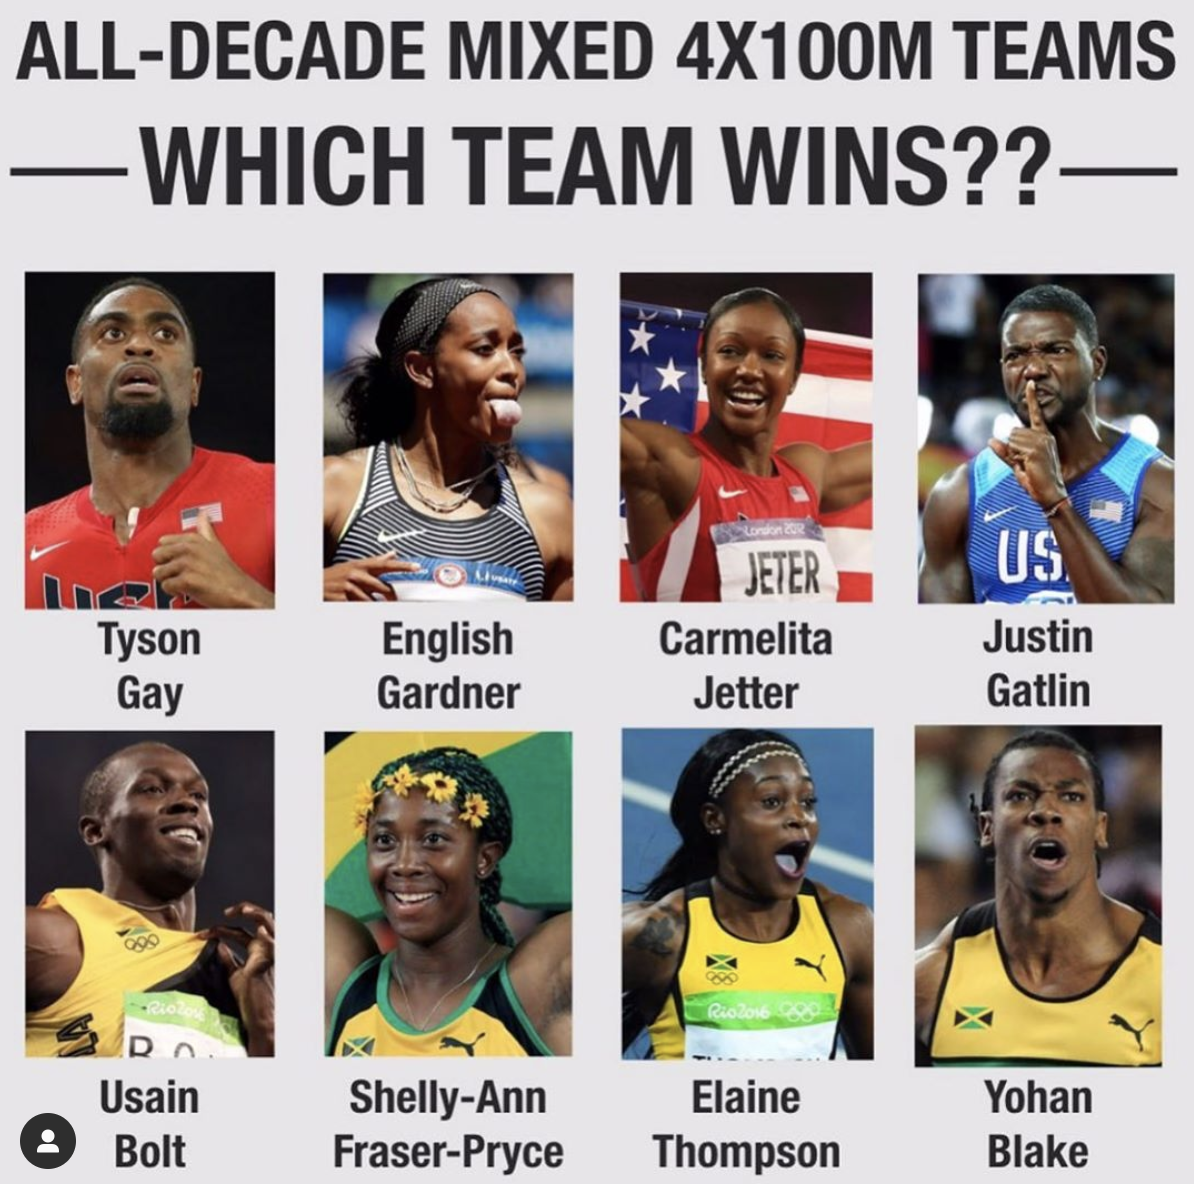 Jamaica vs USA in All-Decade Mixed 4x100m: Which team will win, asks Tyson Gay